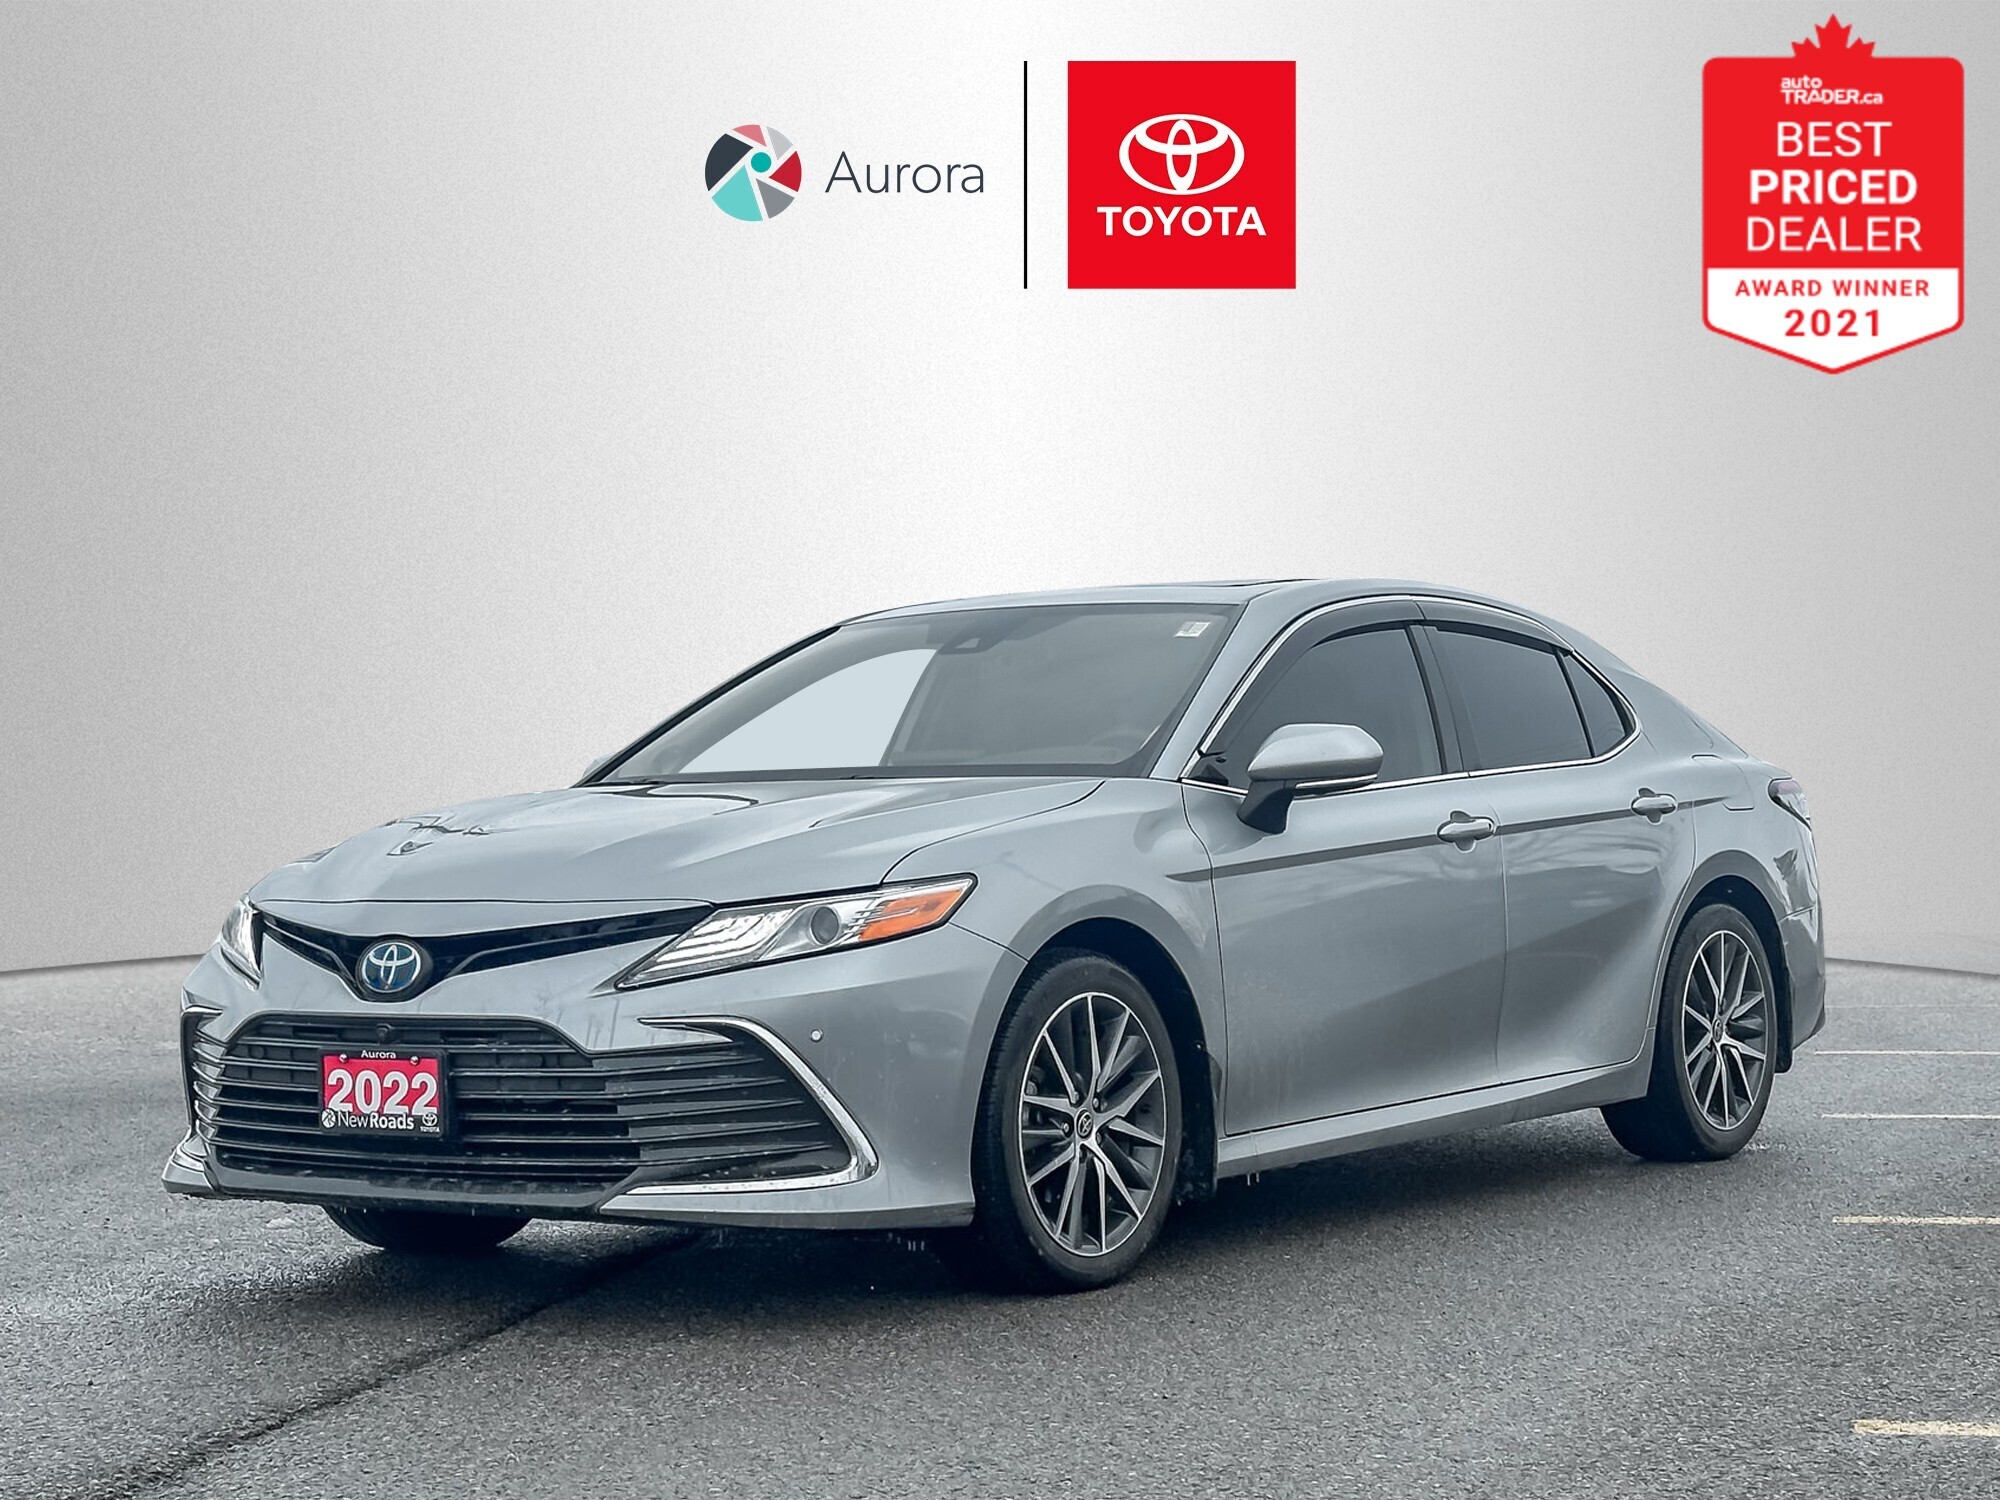 2022 Toyota Camry Hybrid XLE Hybrid - One Owner, No Accidents.